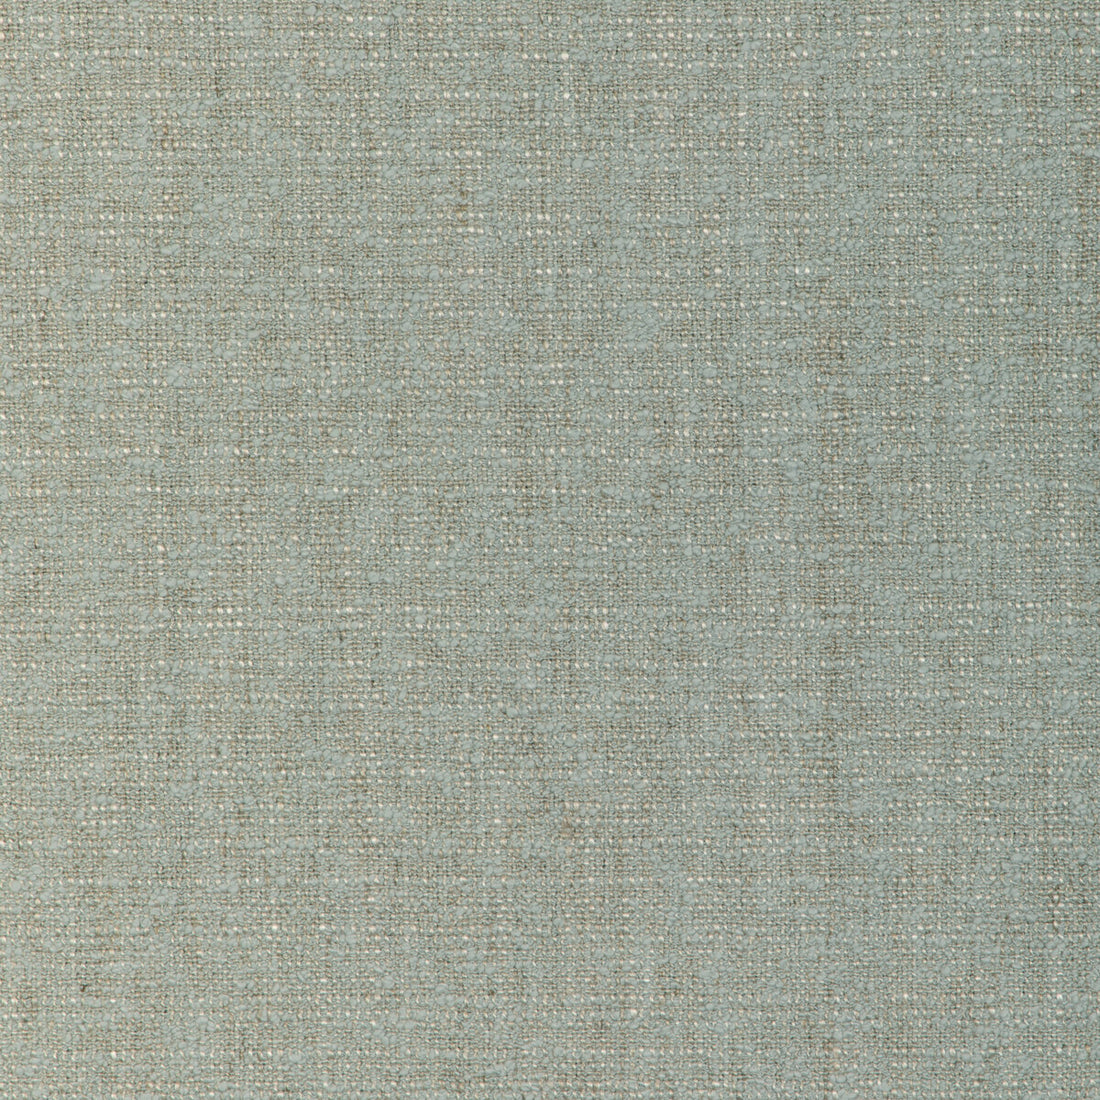 Heritage Weave fabric in mist color - pattern 36900.15.0 - by Kravet Couture in the Atelier Weaves collection